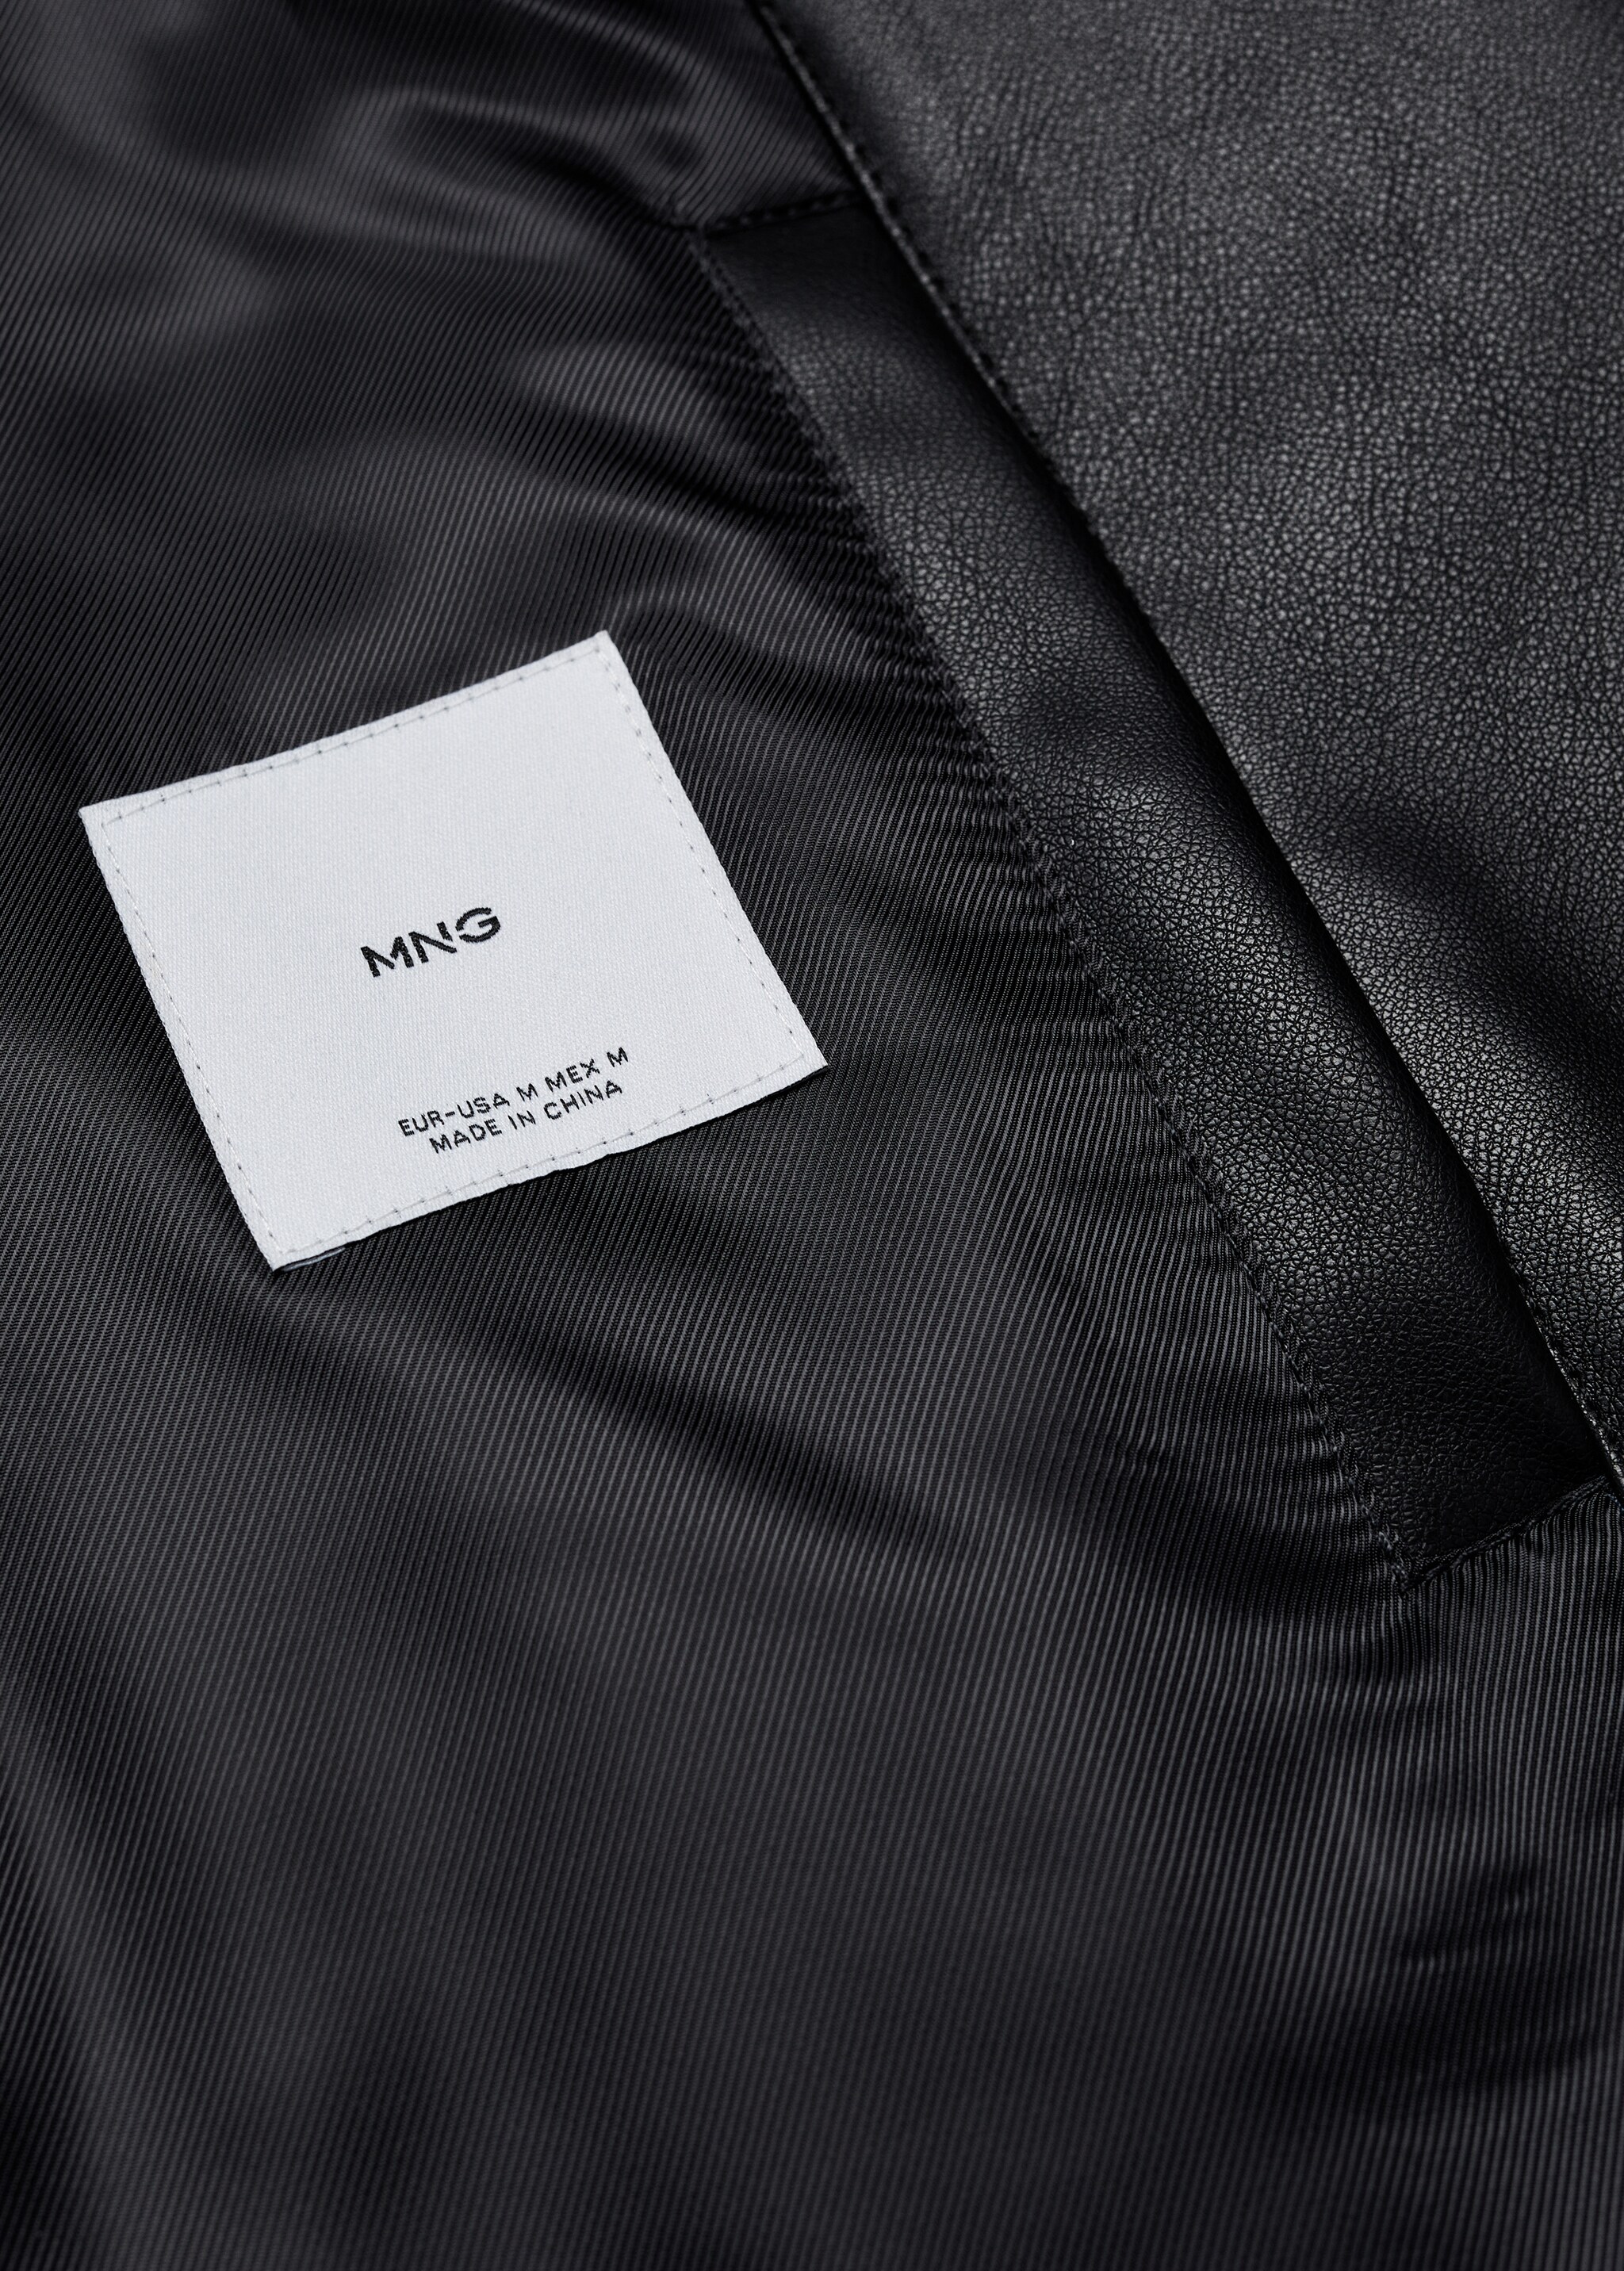 Perfect leather-effect jacket - Details of the article 8